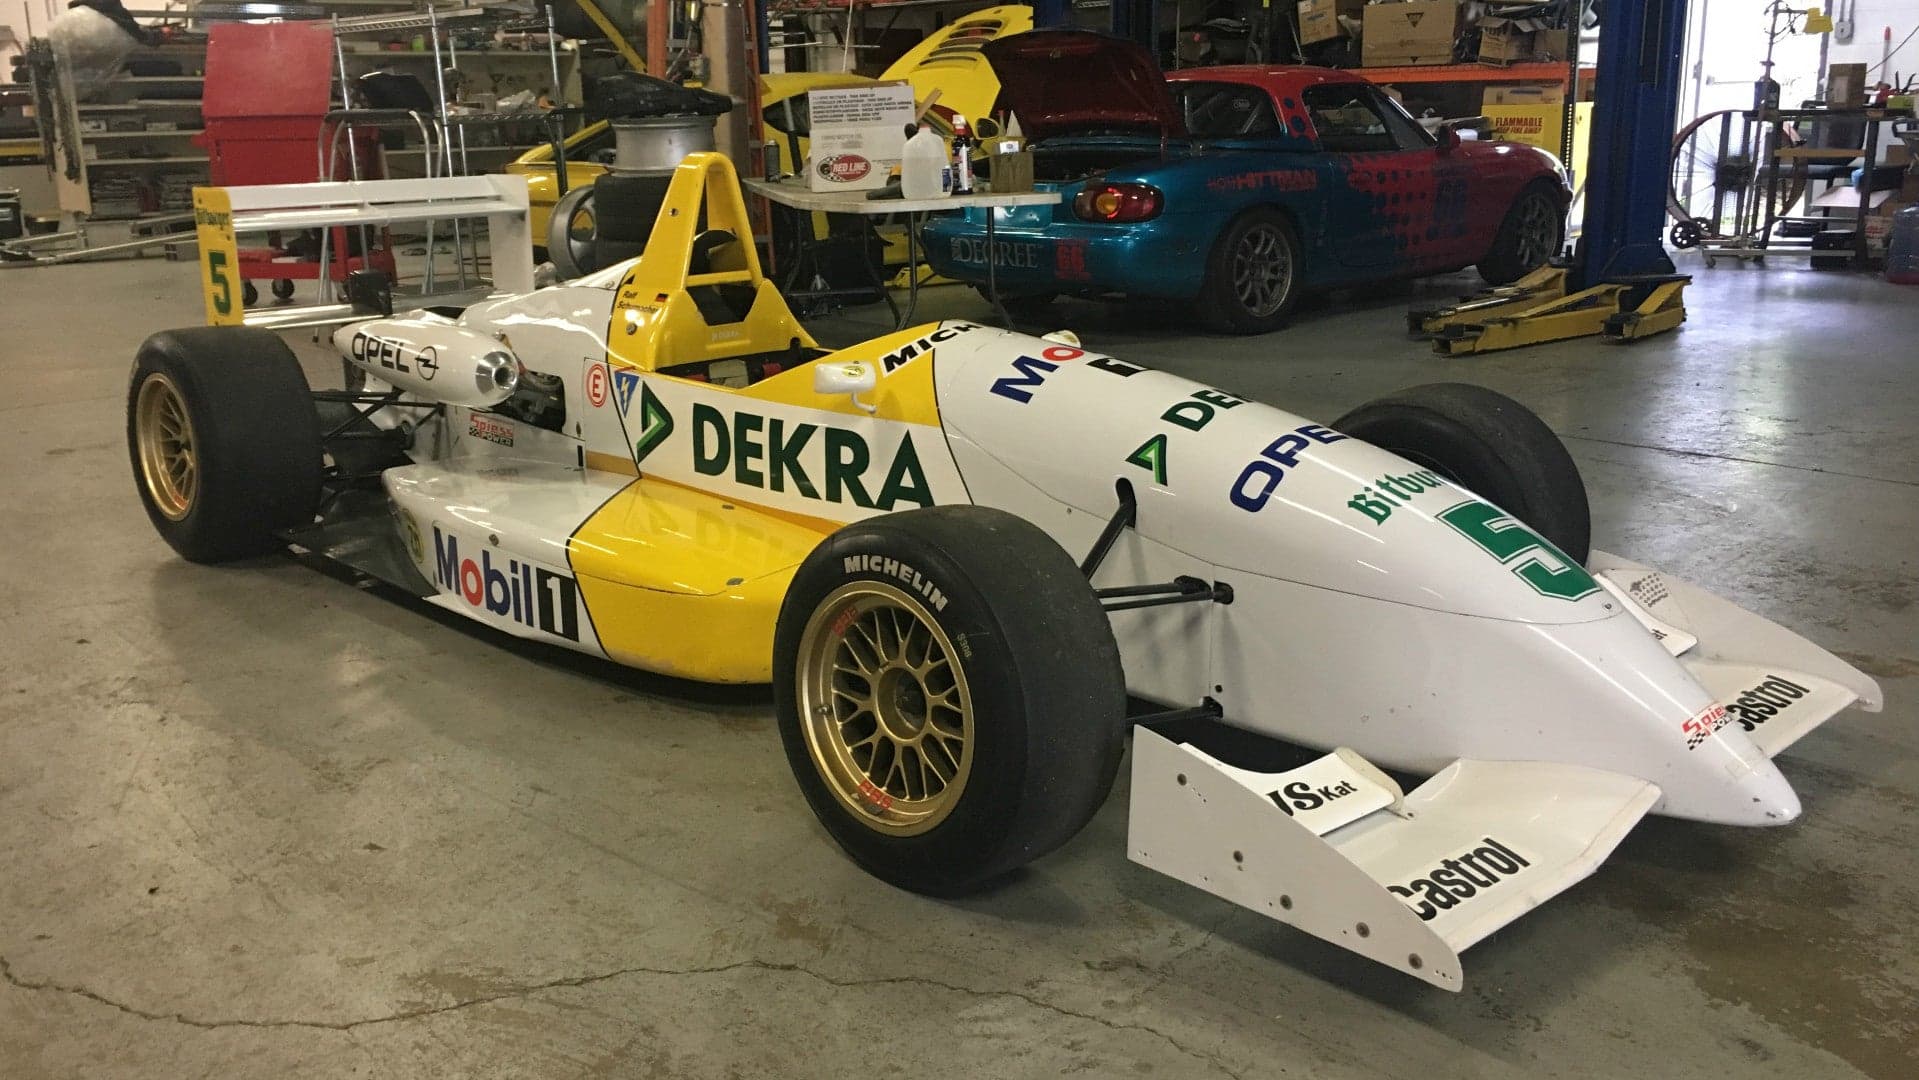 This German Formula 3 Car Driven By a Schumacher Can Be Yours